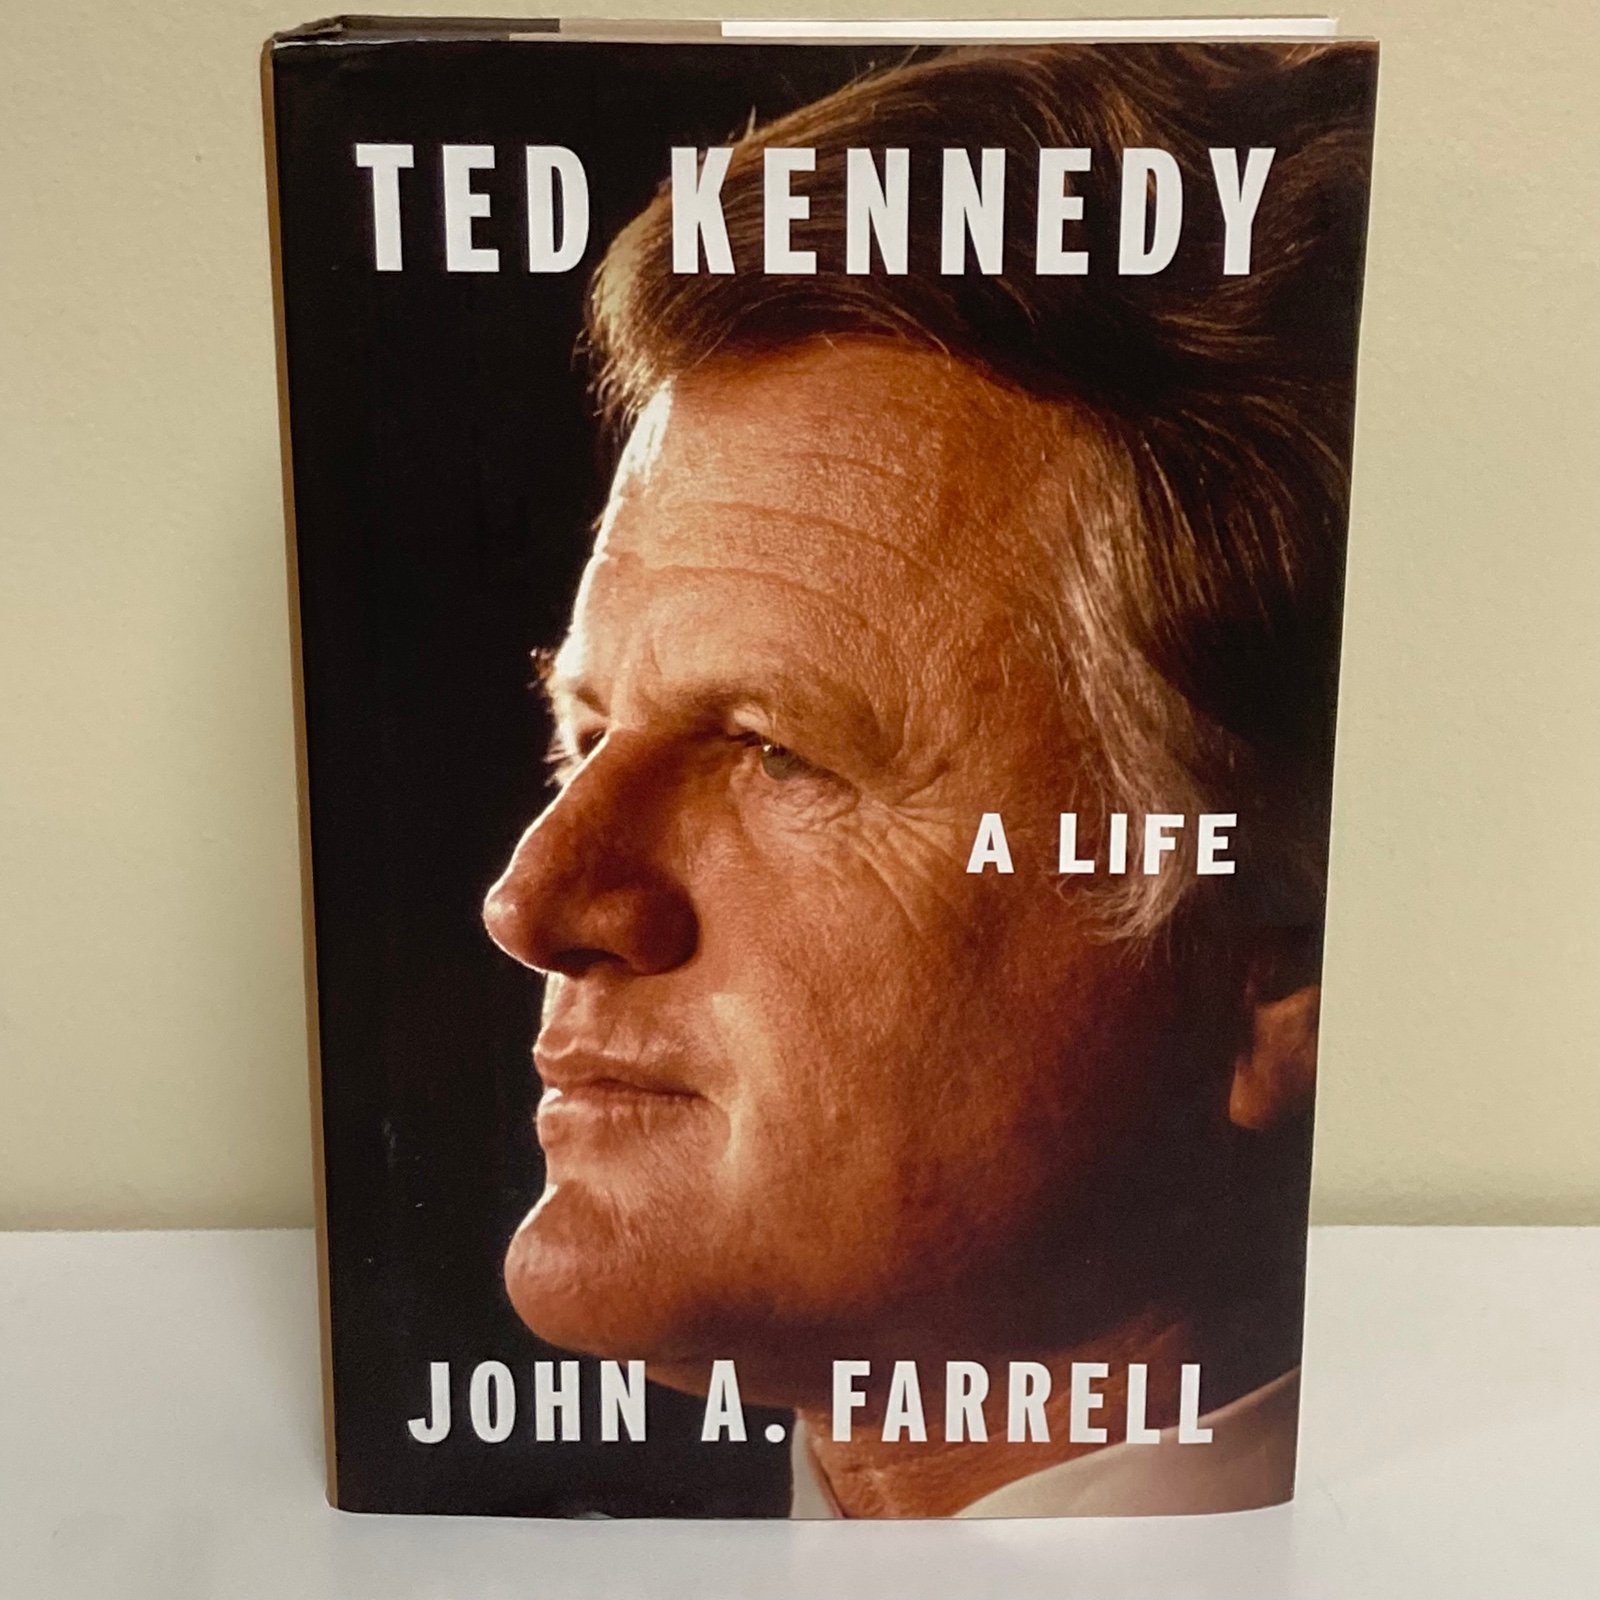 Ted Kennedy: A Life Book by John A. Farrell G3E9xKmmd